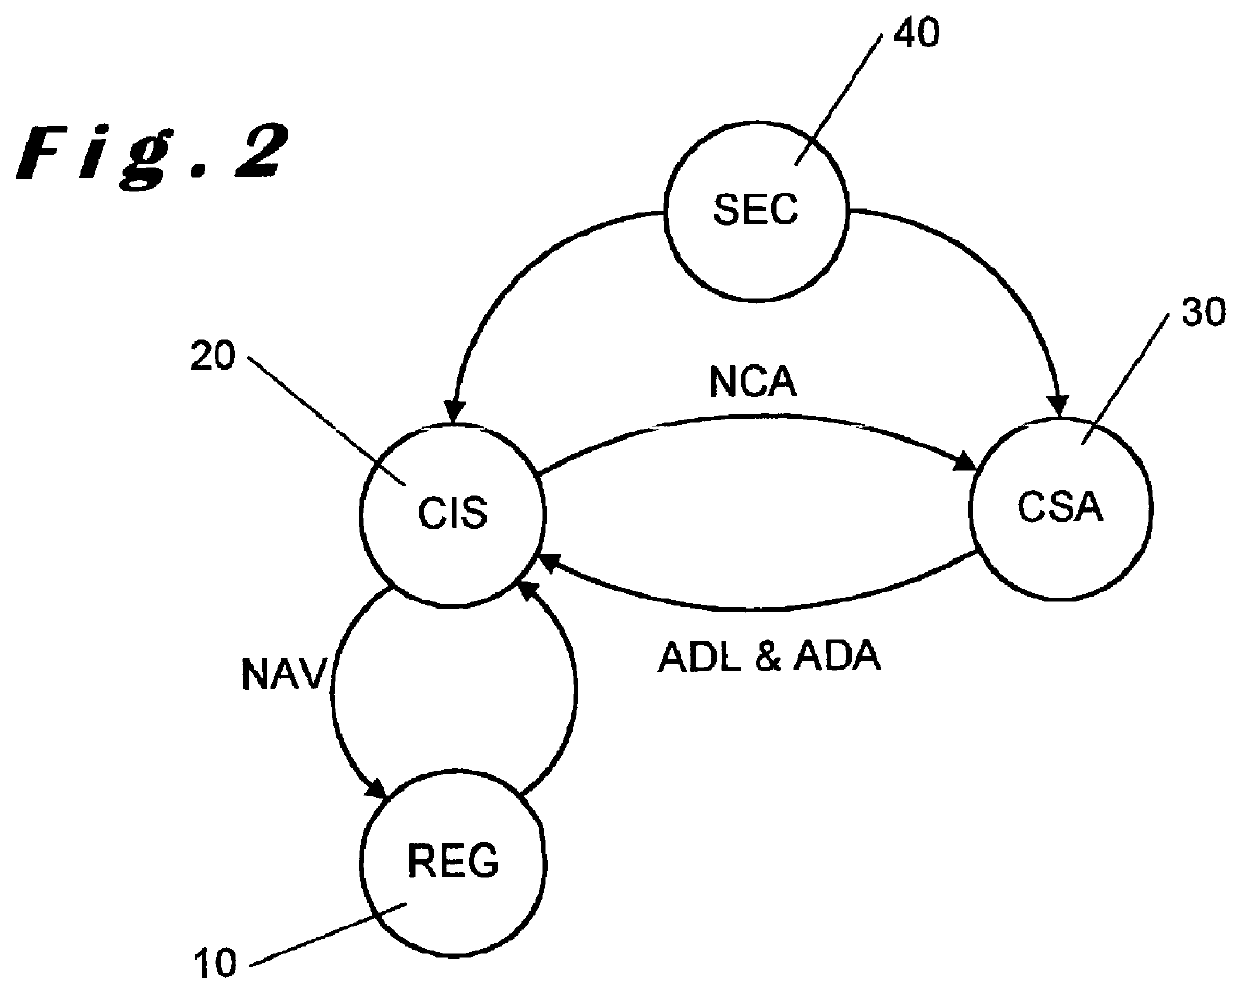 Data processing system for the selective distribution of assets between different portfolios